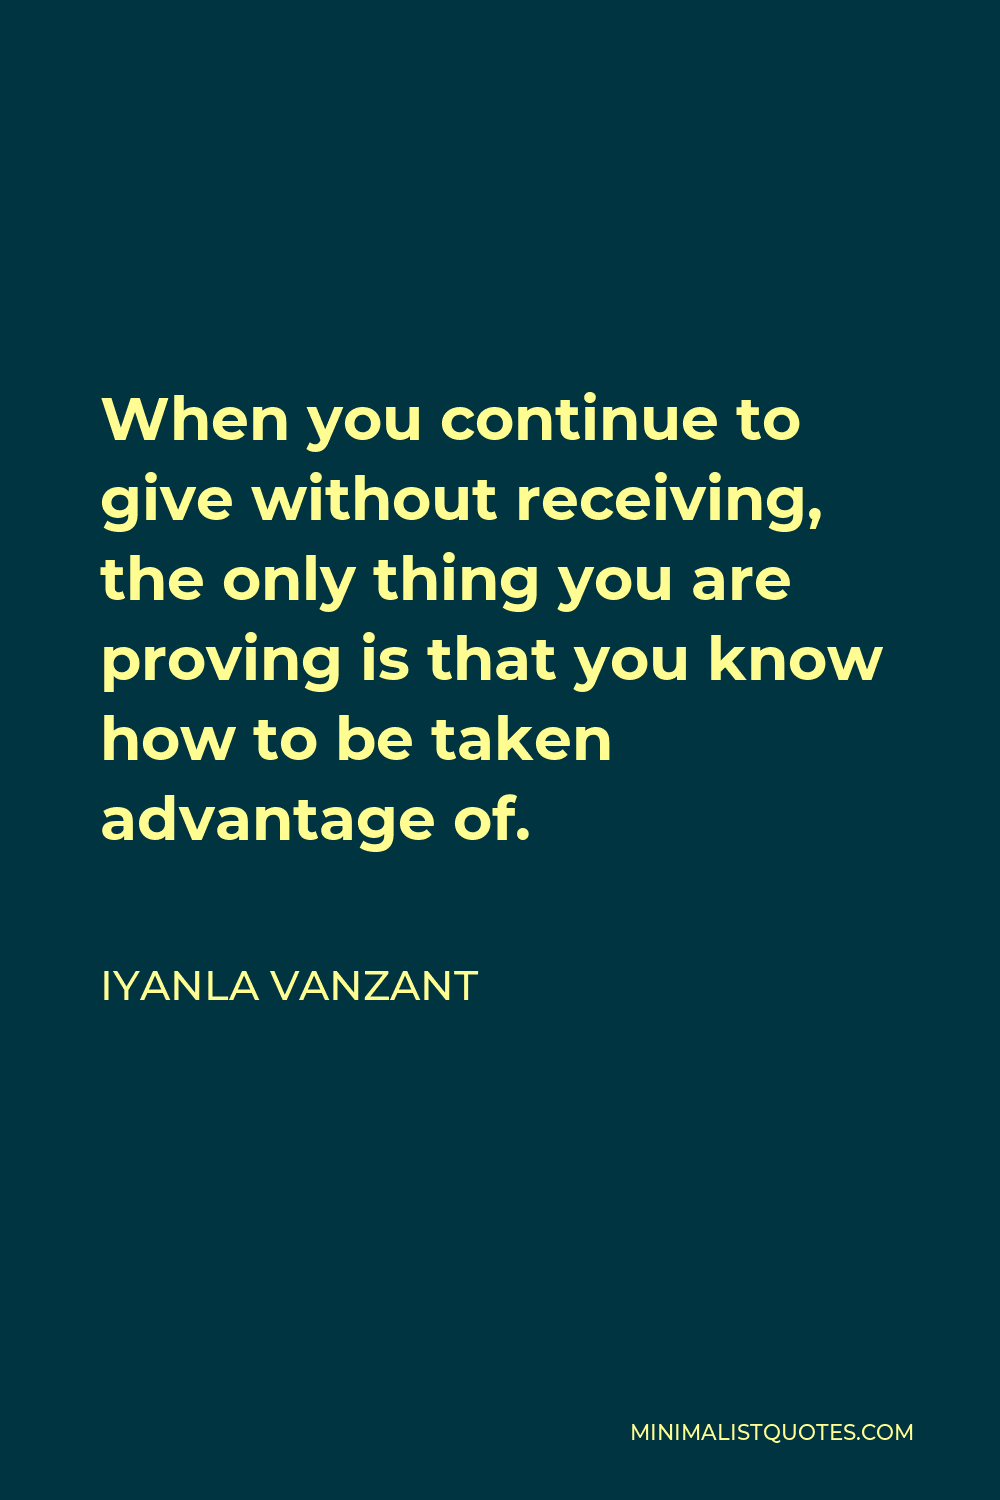 Iyanla Vanzant Quote - When you continue to give without receiving, the only thing you are proving is that you know how to be taken advantage of.